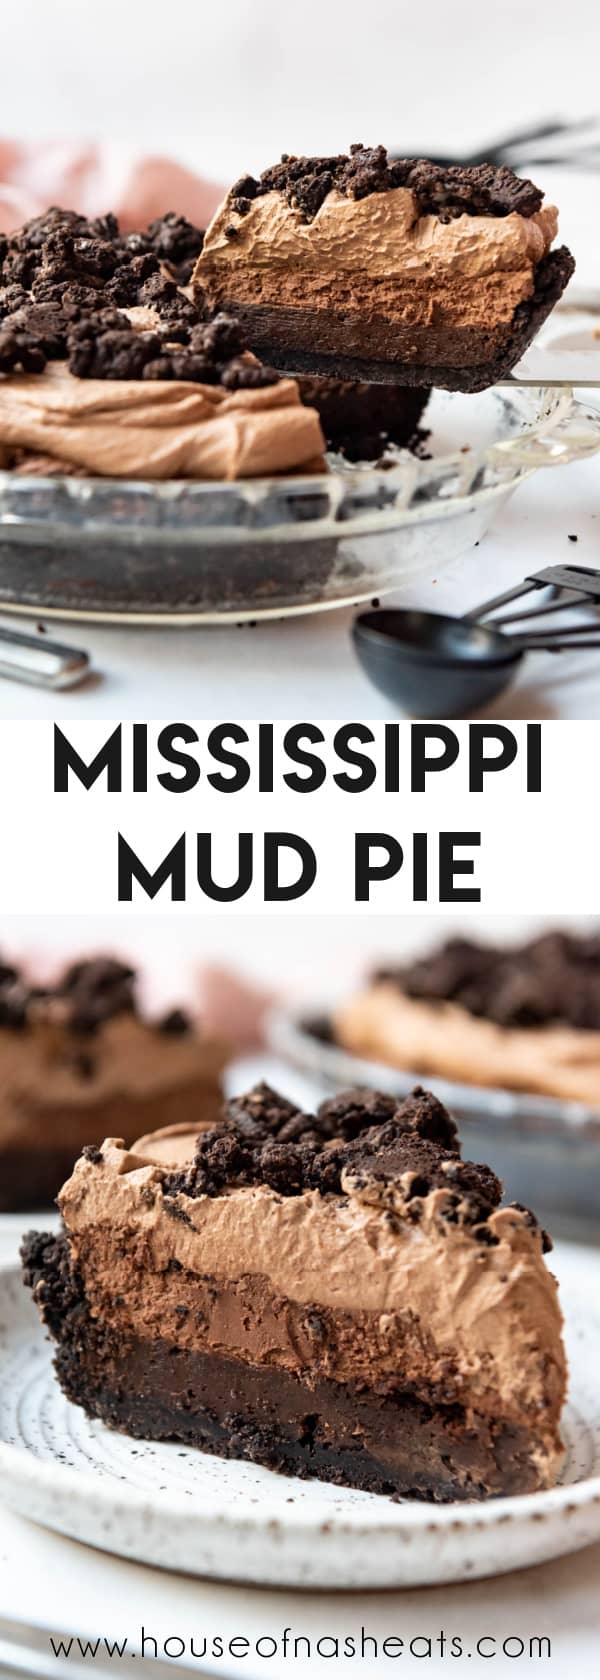 A collage of images of mississippi mud pie with text overlay.